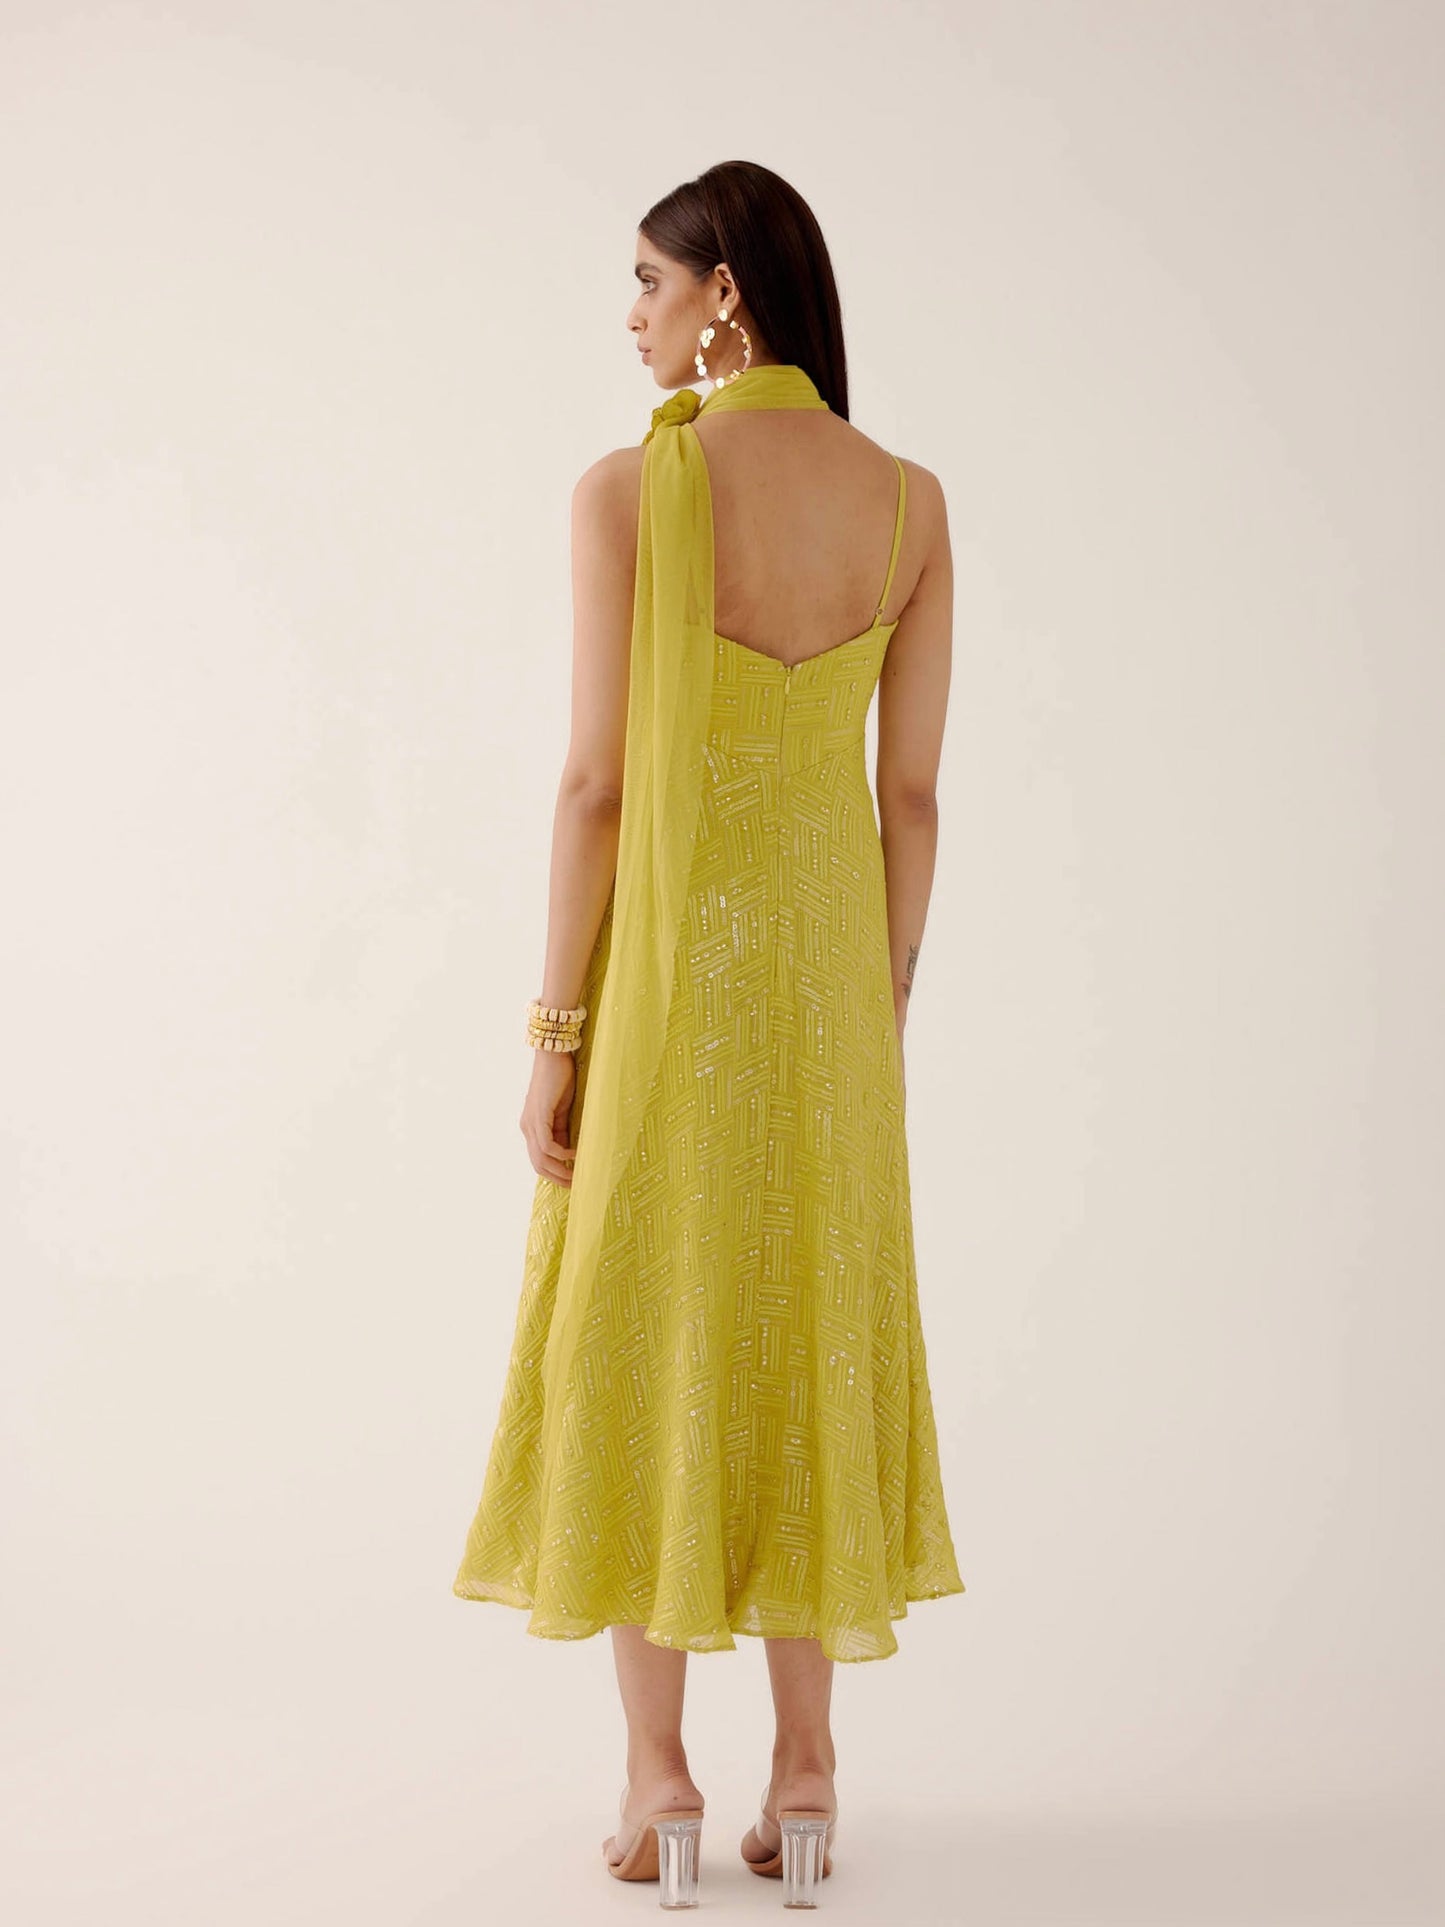 The Zara Dress is a midi-length dress with delicate sequin work throughout. The dress comes with a skinny dupatta and a detachable, handmade rosette clip.